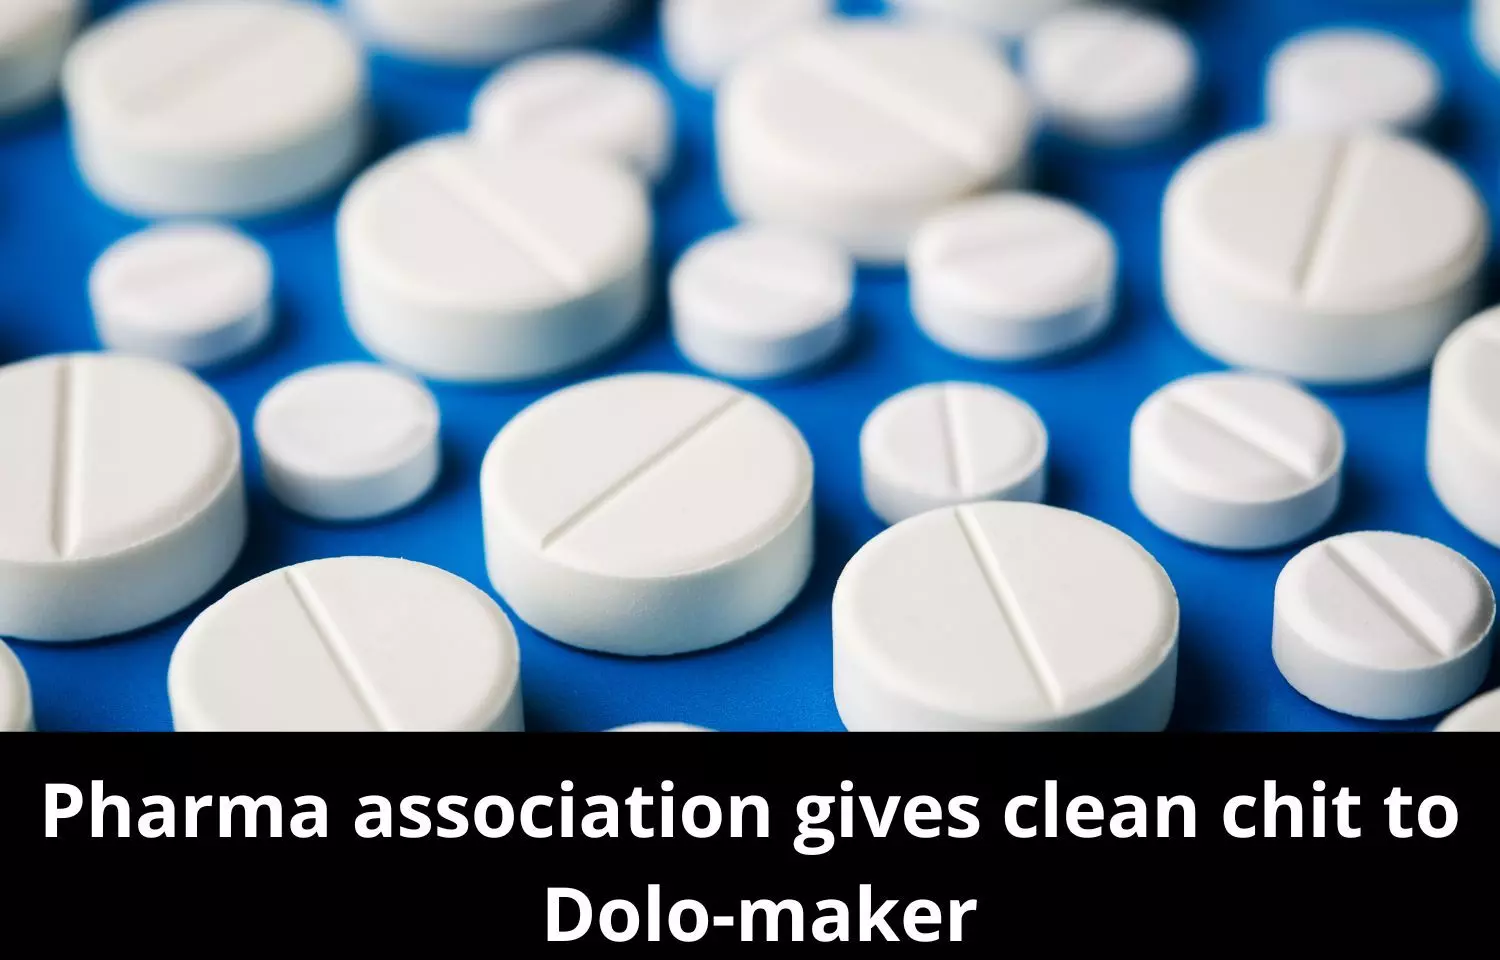 Pharma association gives clean chit to Dolo-maker